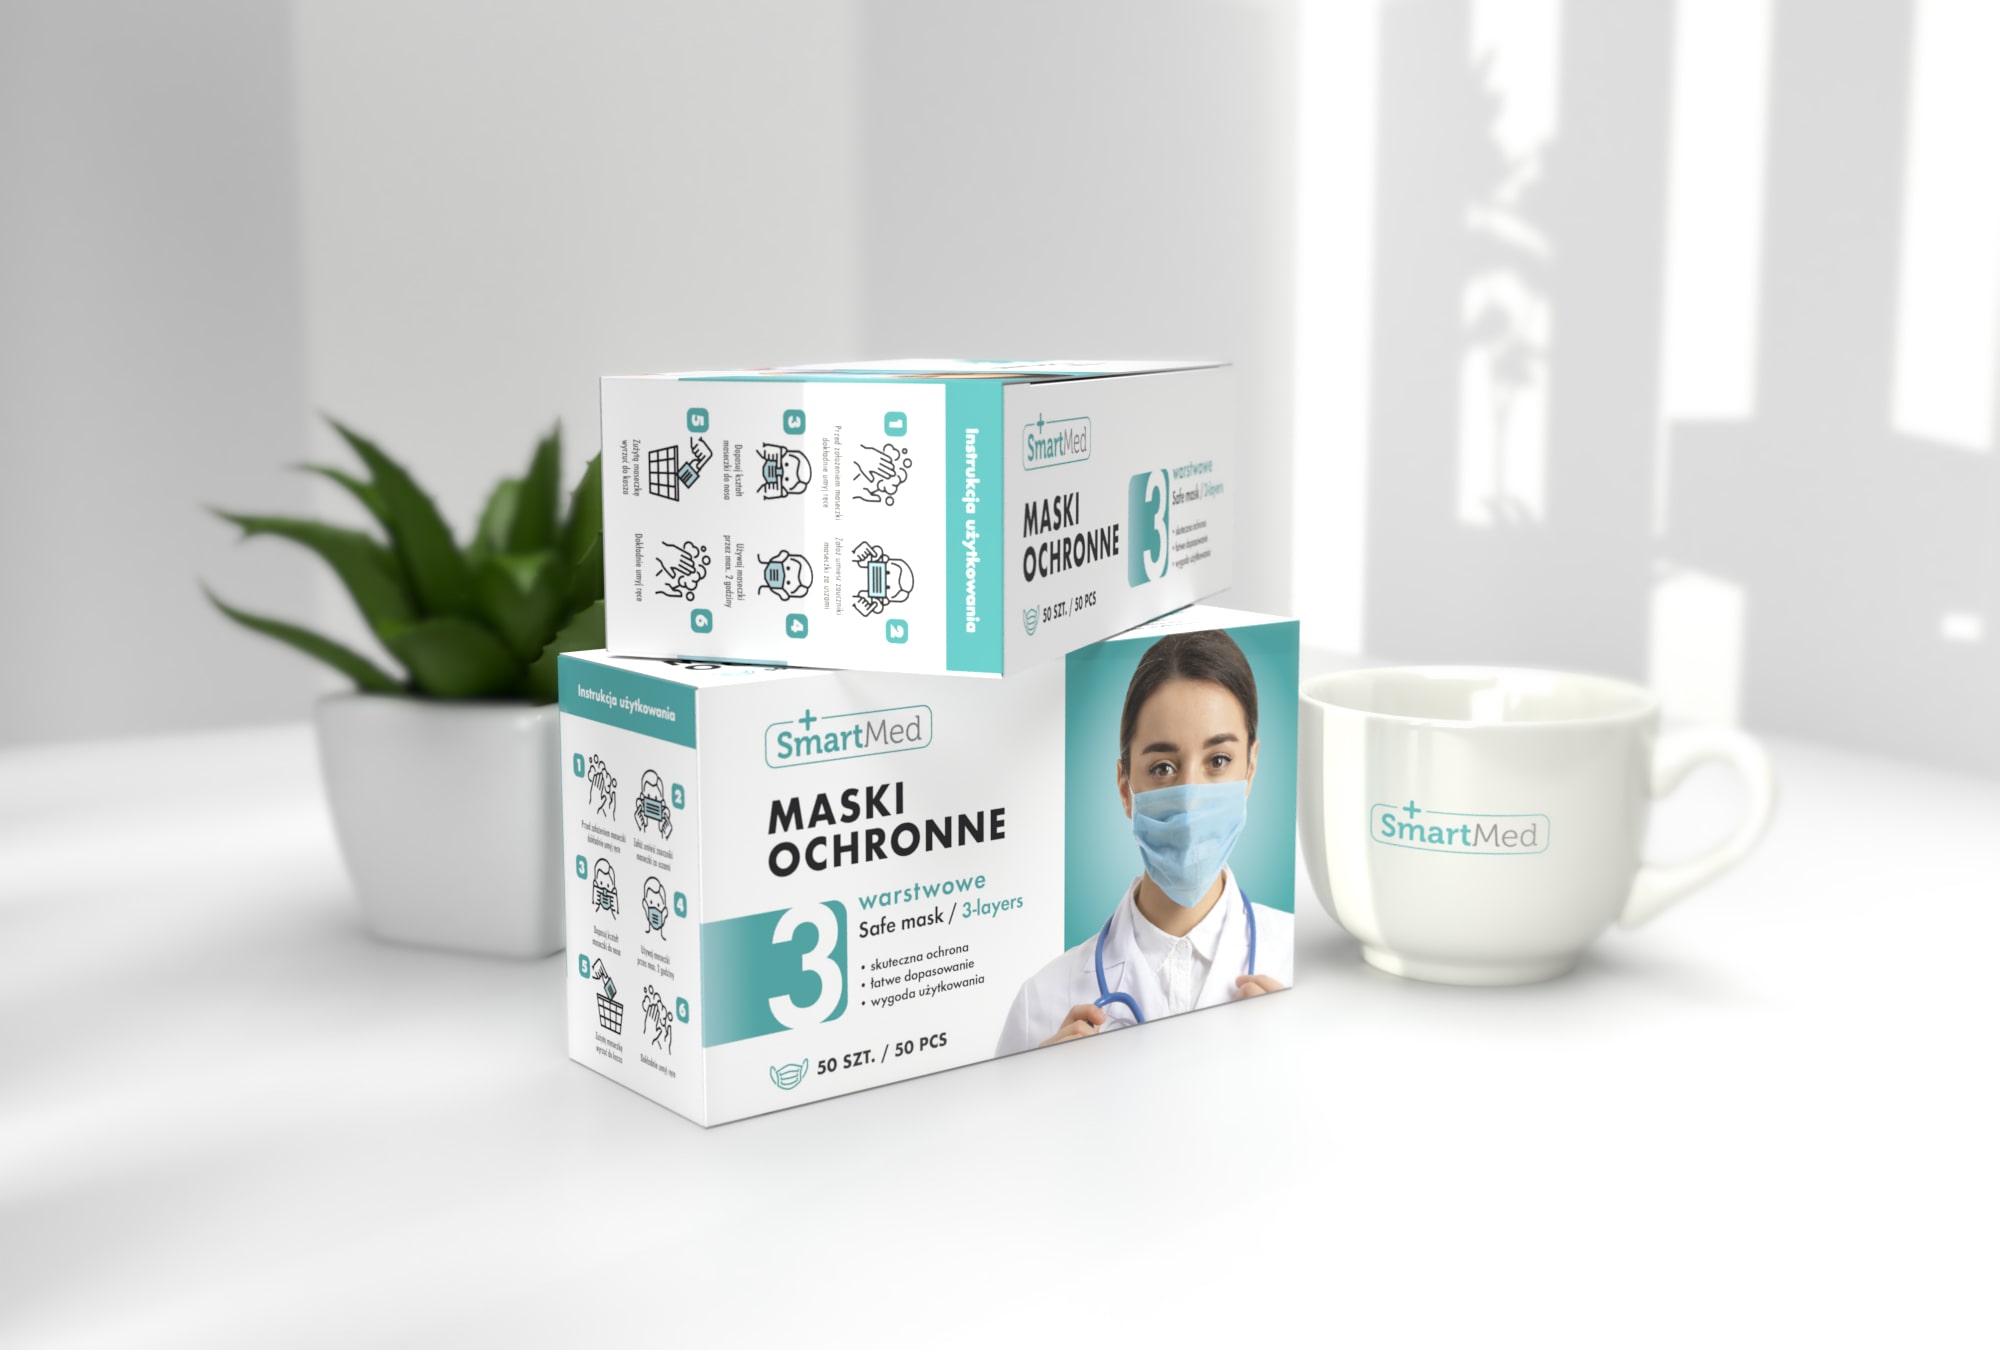 face-masks-protective-packaging-design-graphic-design-studio-agency-branding-logo-company-stationery